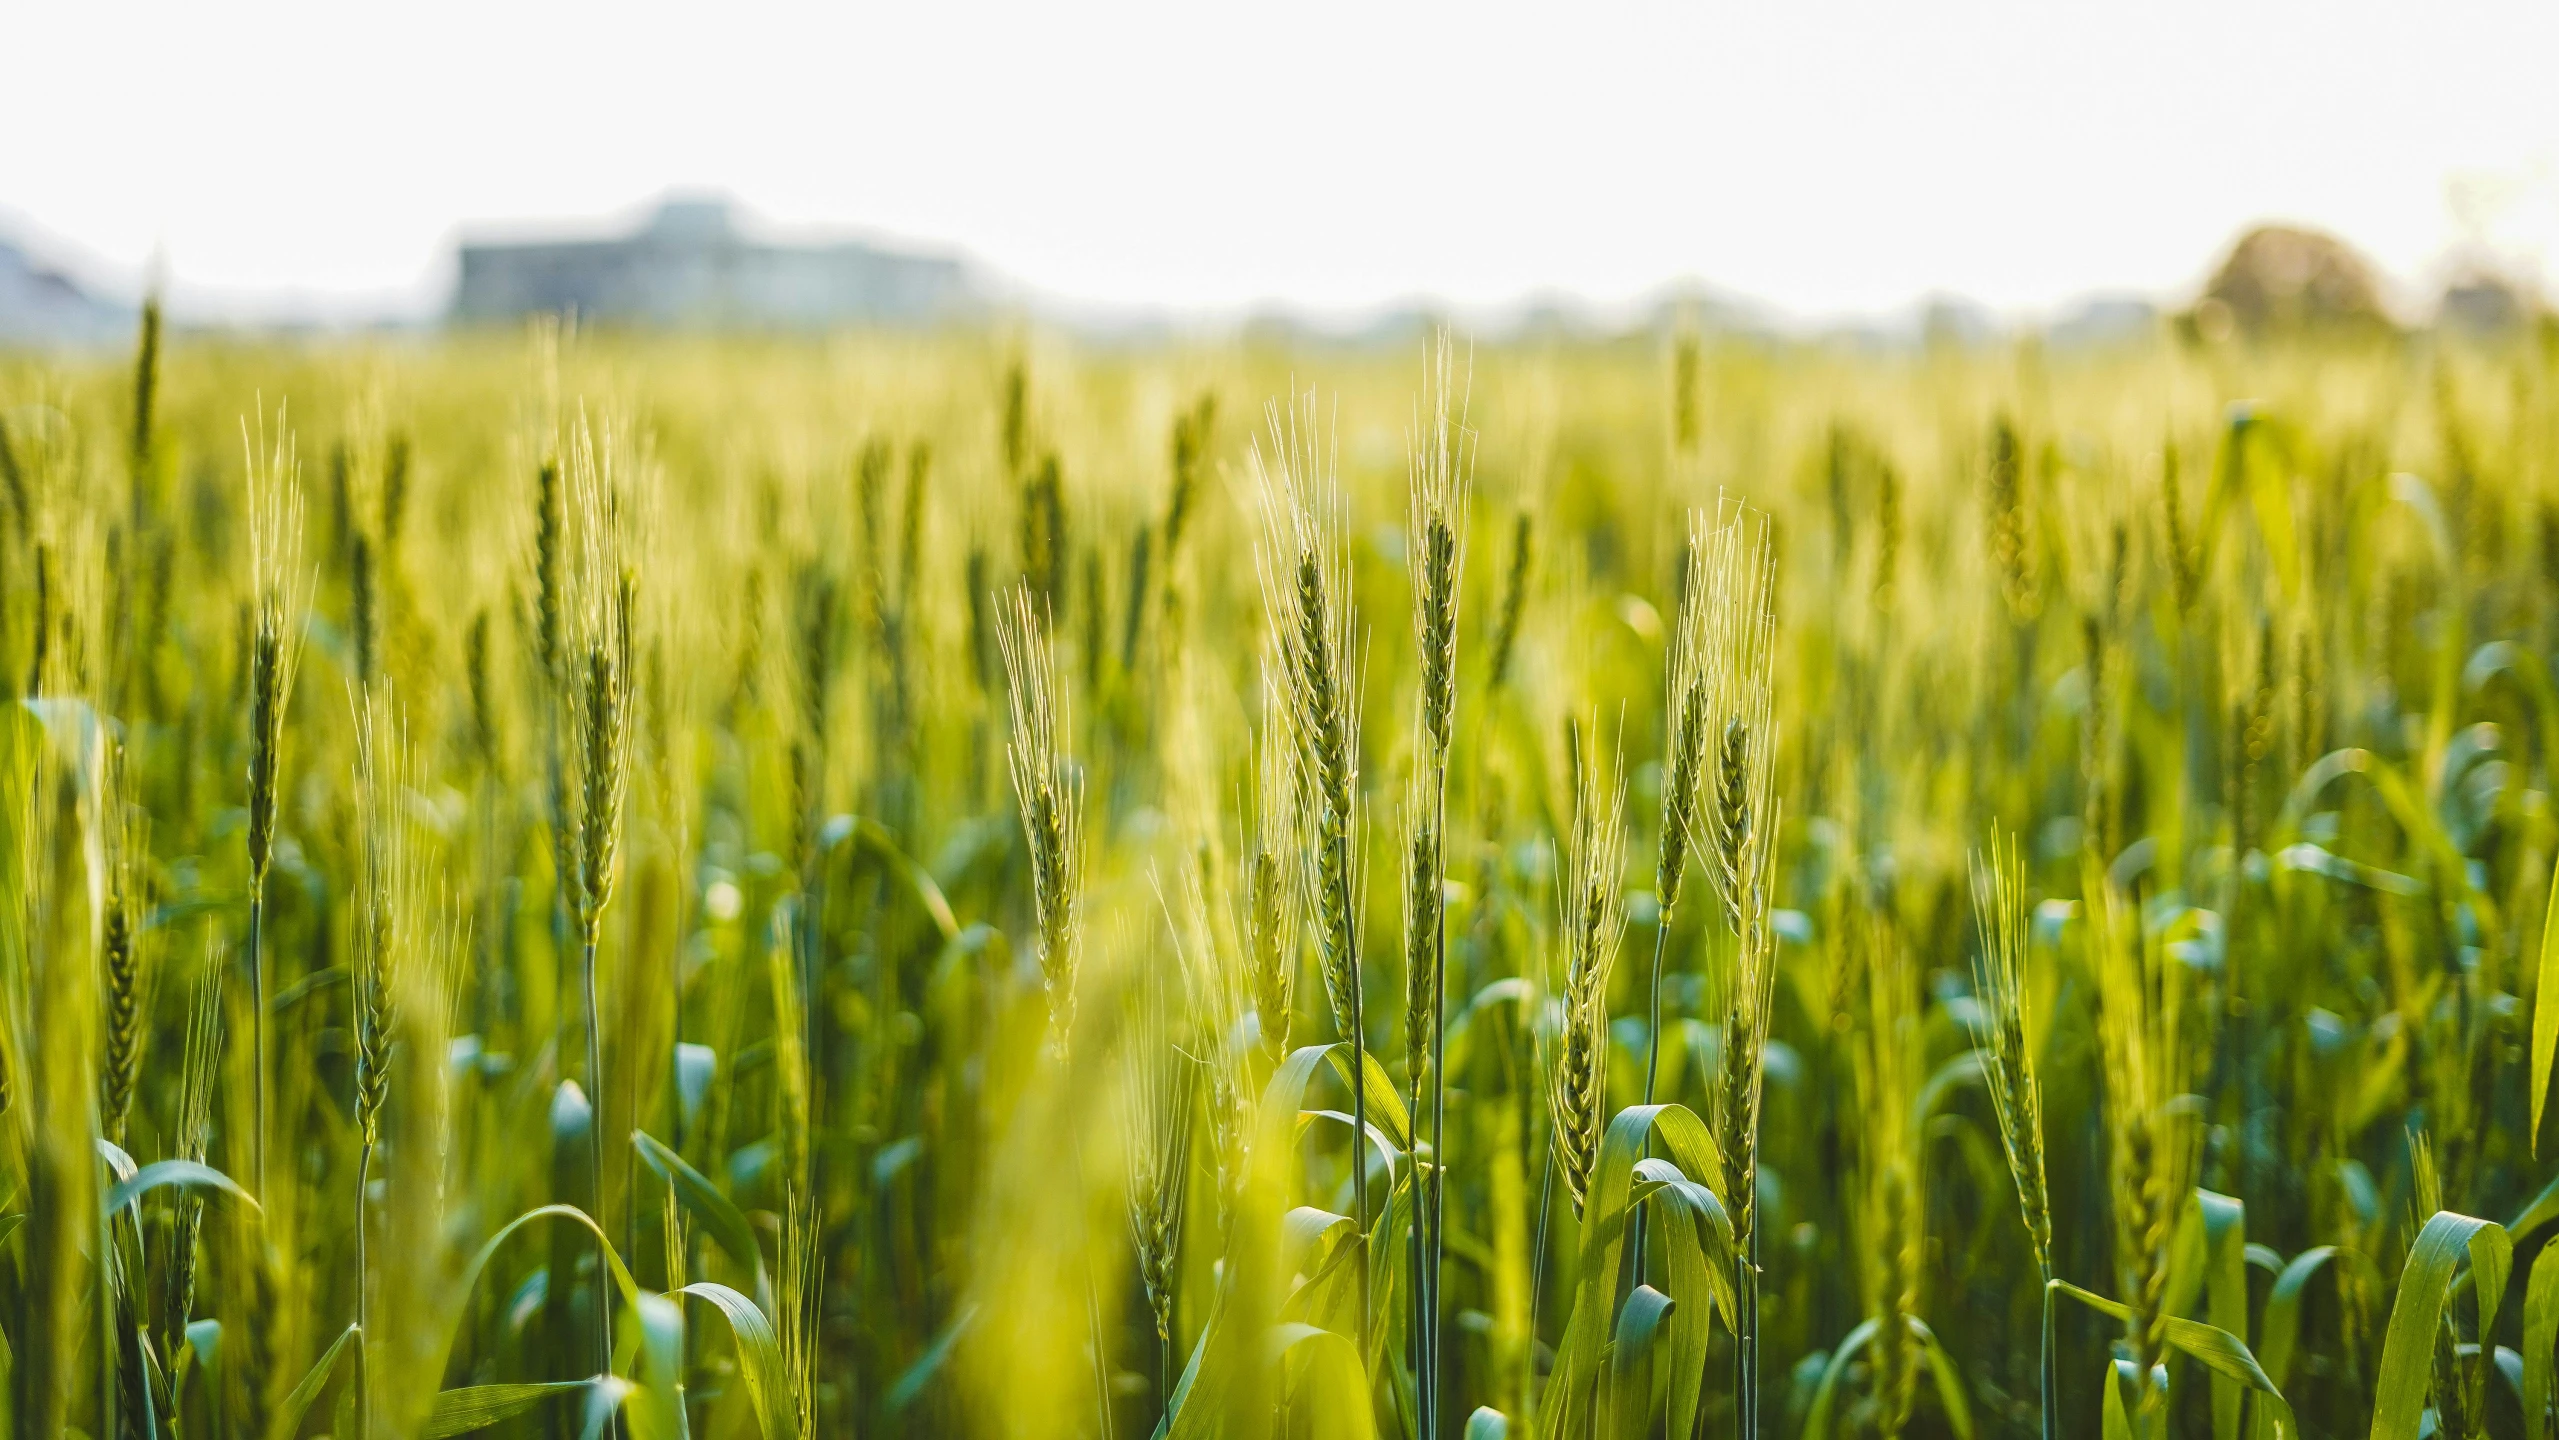 a field of green grass with buildings in the background, a picture, pexels, precisionism, wheat field, mineral grains, corn, youtube thumbnail